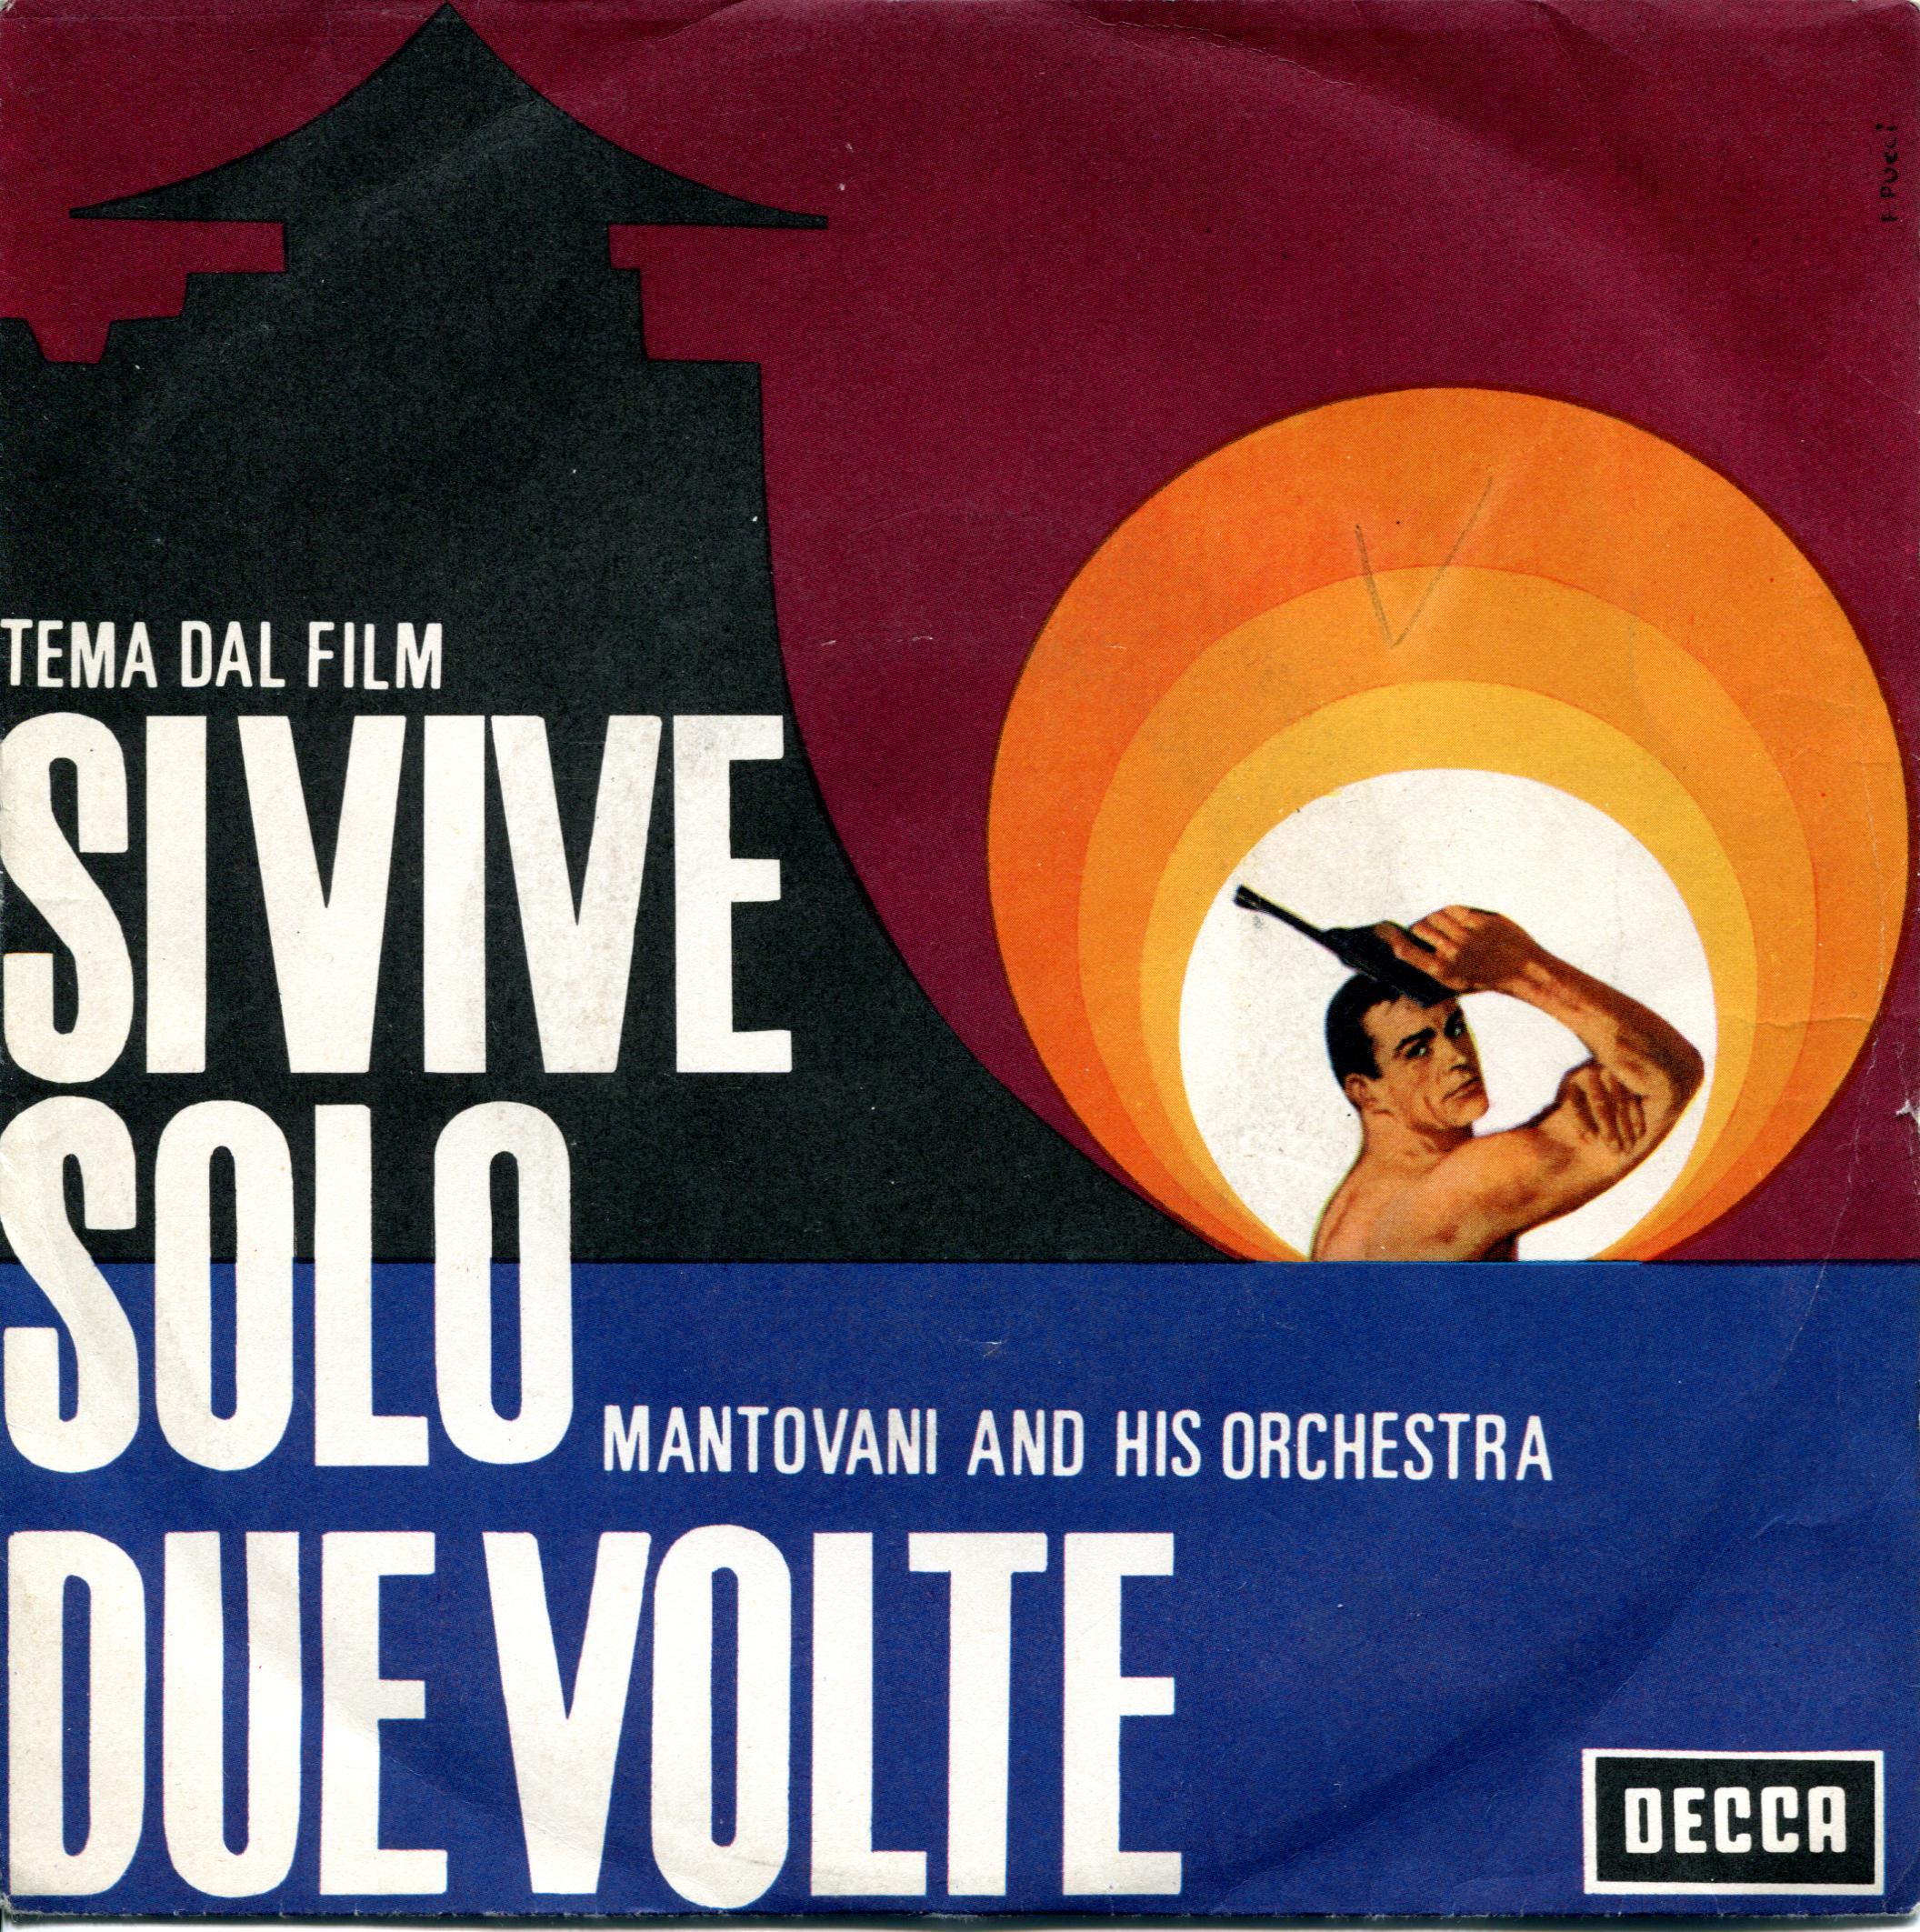 Mantovani and his orchestra - Tema dal Film Si Vive Soli Due Volte (You Only Live Twice)